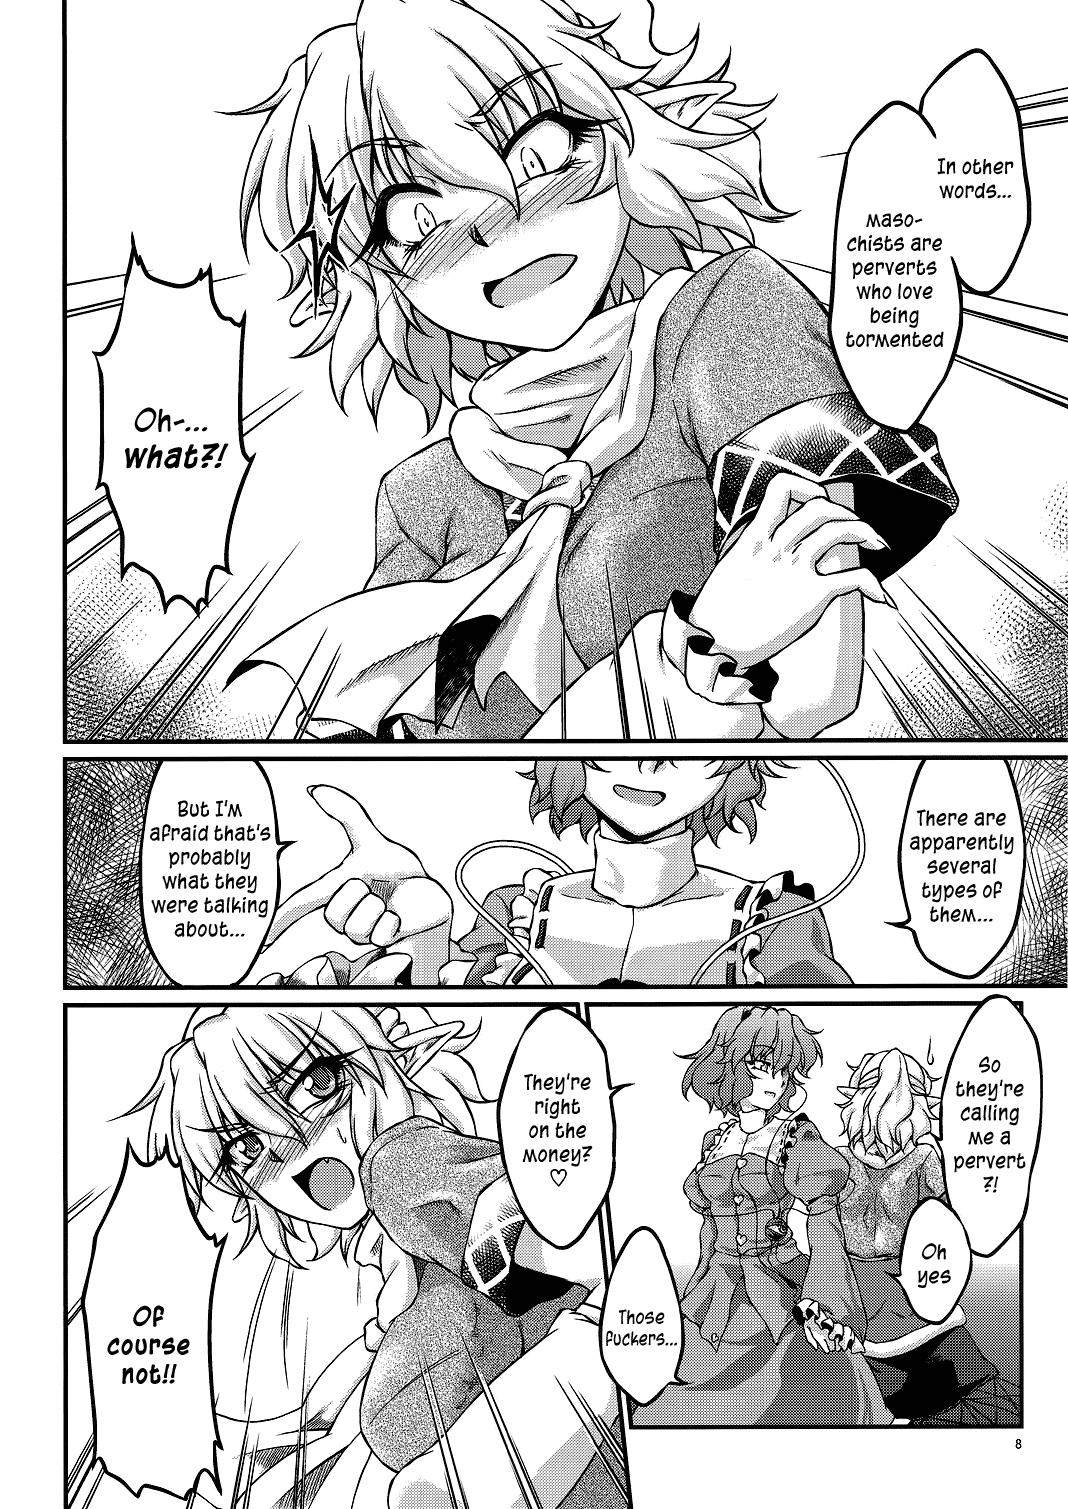 Free Blowjob Porn Say the Word - Touhou project Blond - Page 7